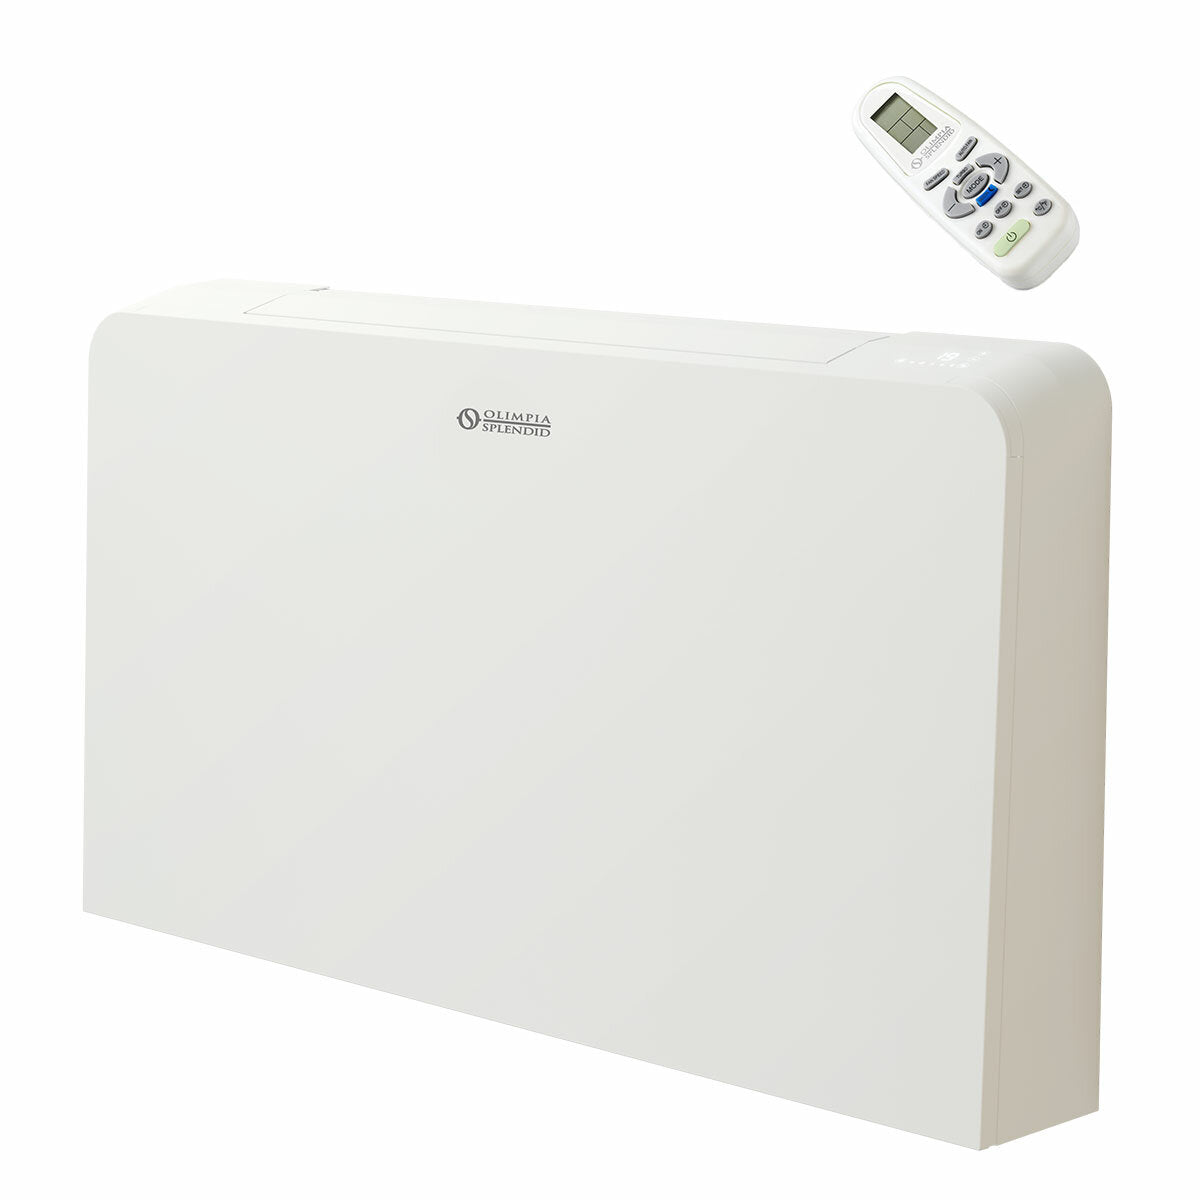 Olimpia Splendid Bi2 SLR AIR inverter 600 DC kW 3,12 - 2,54 Fan coil with radiant panel + TR control and remote control